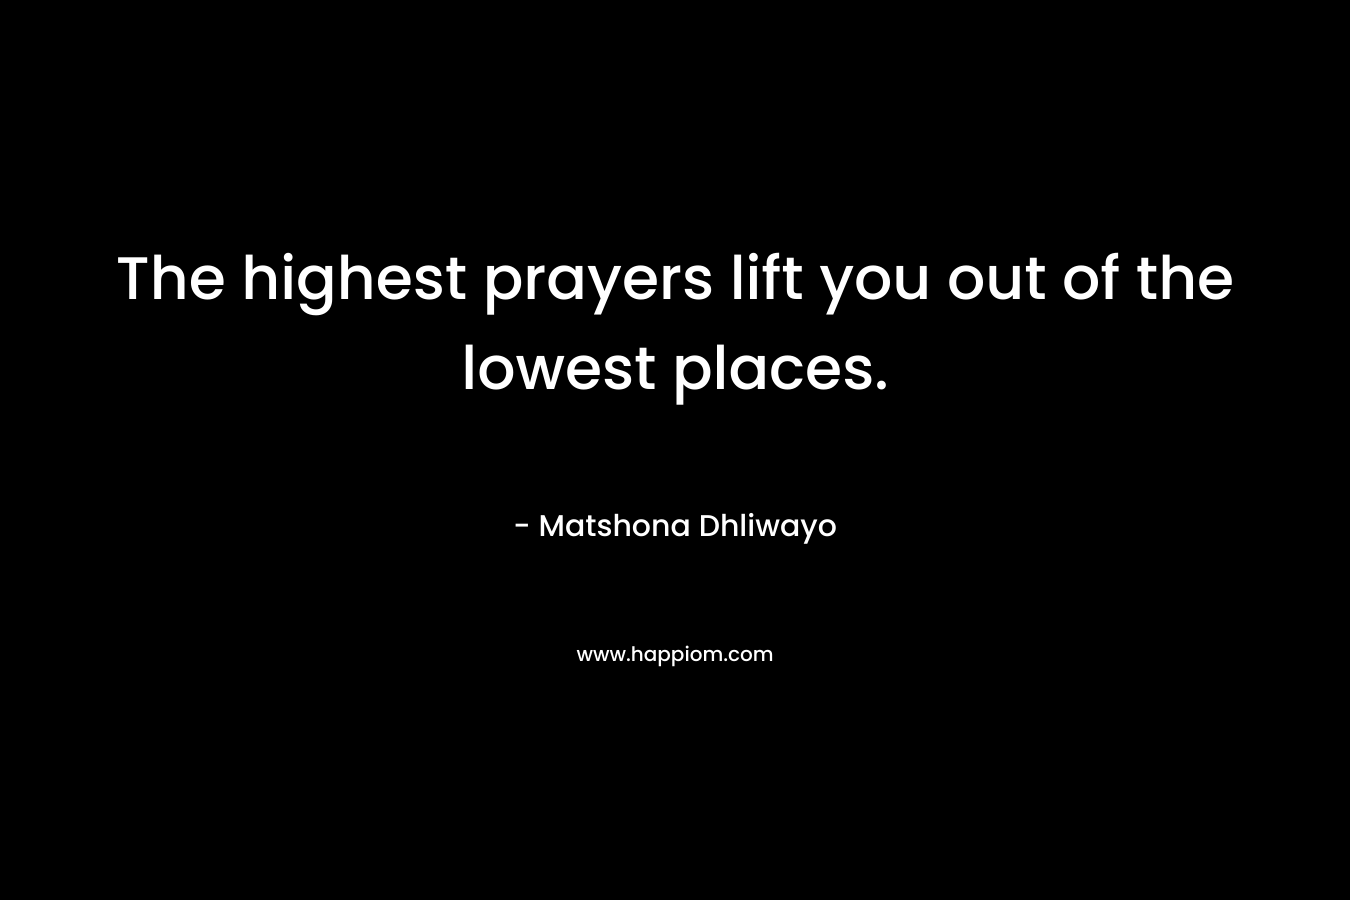 The highest prayers lift you out of the lowest places. – Matshona Dhliwayo